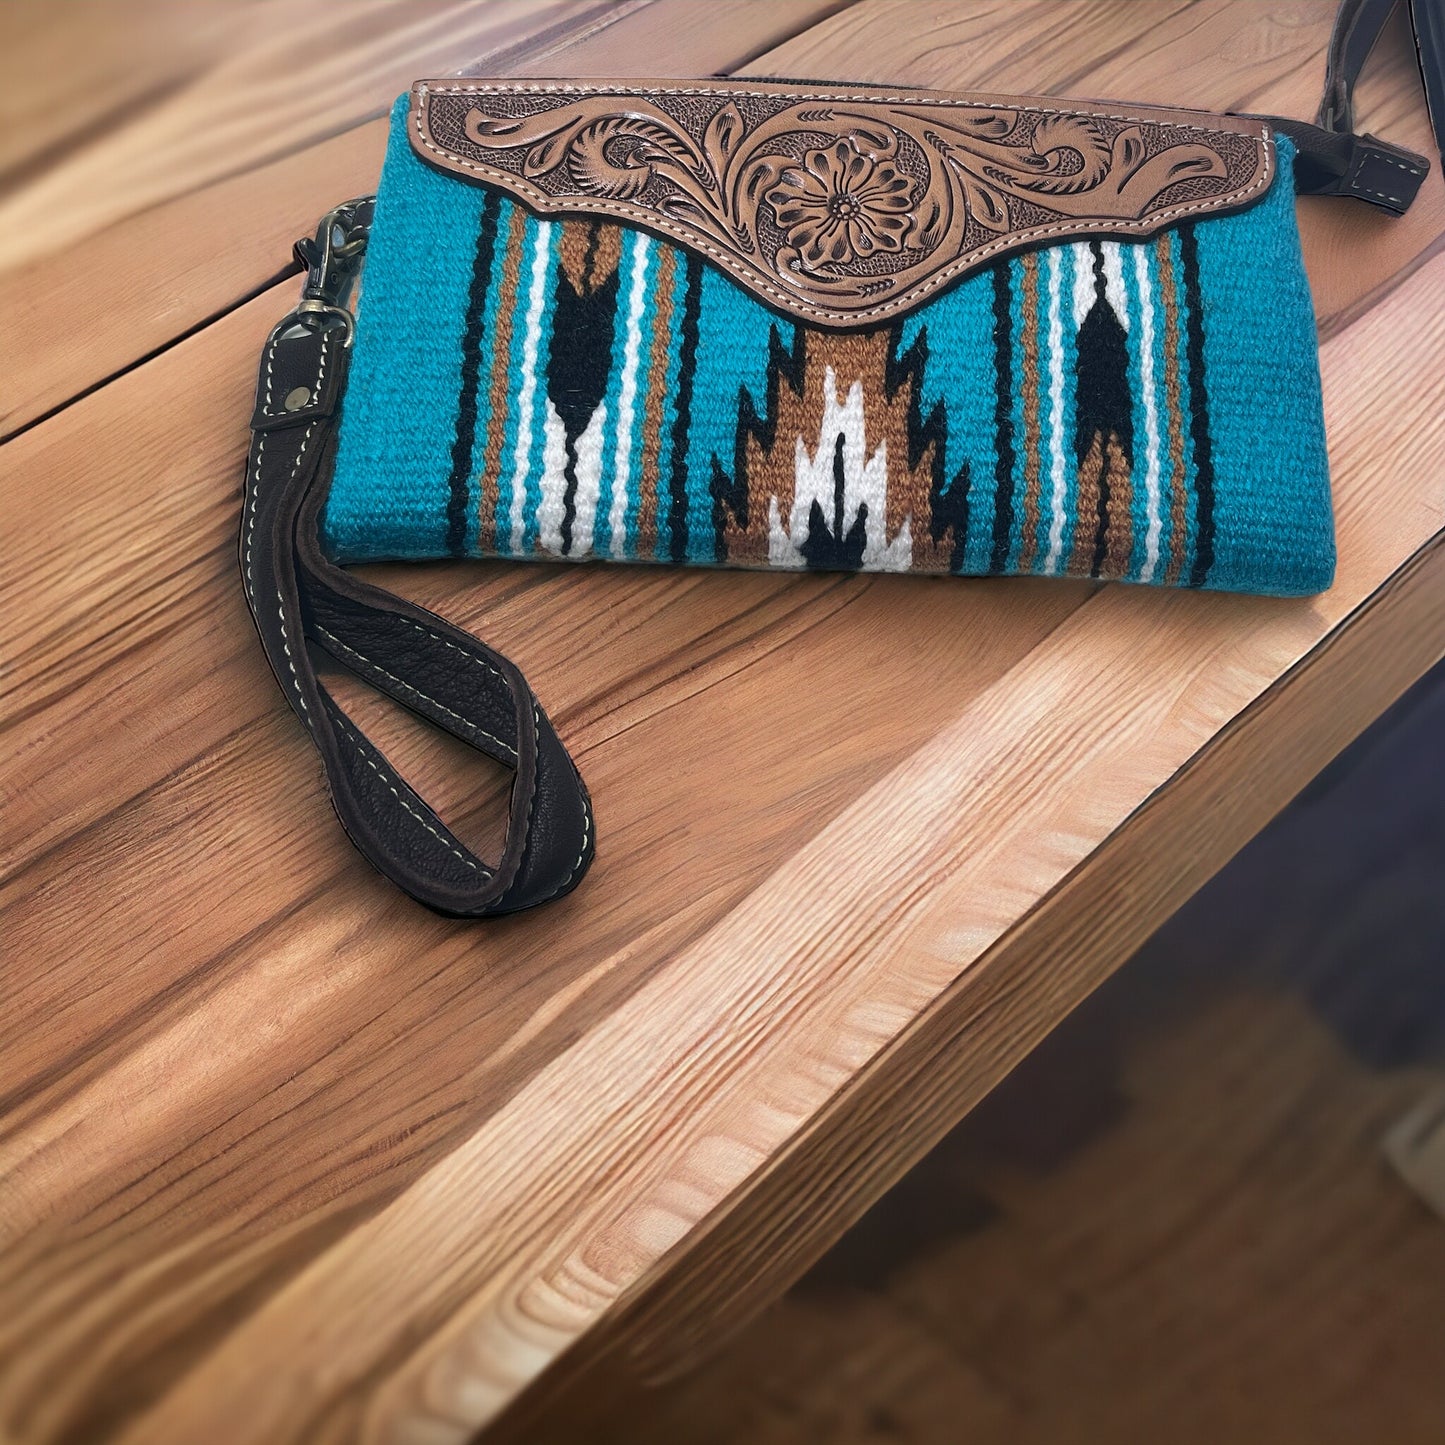 Turquoise Saddle Blanket Clutch with Tooled Leather